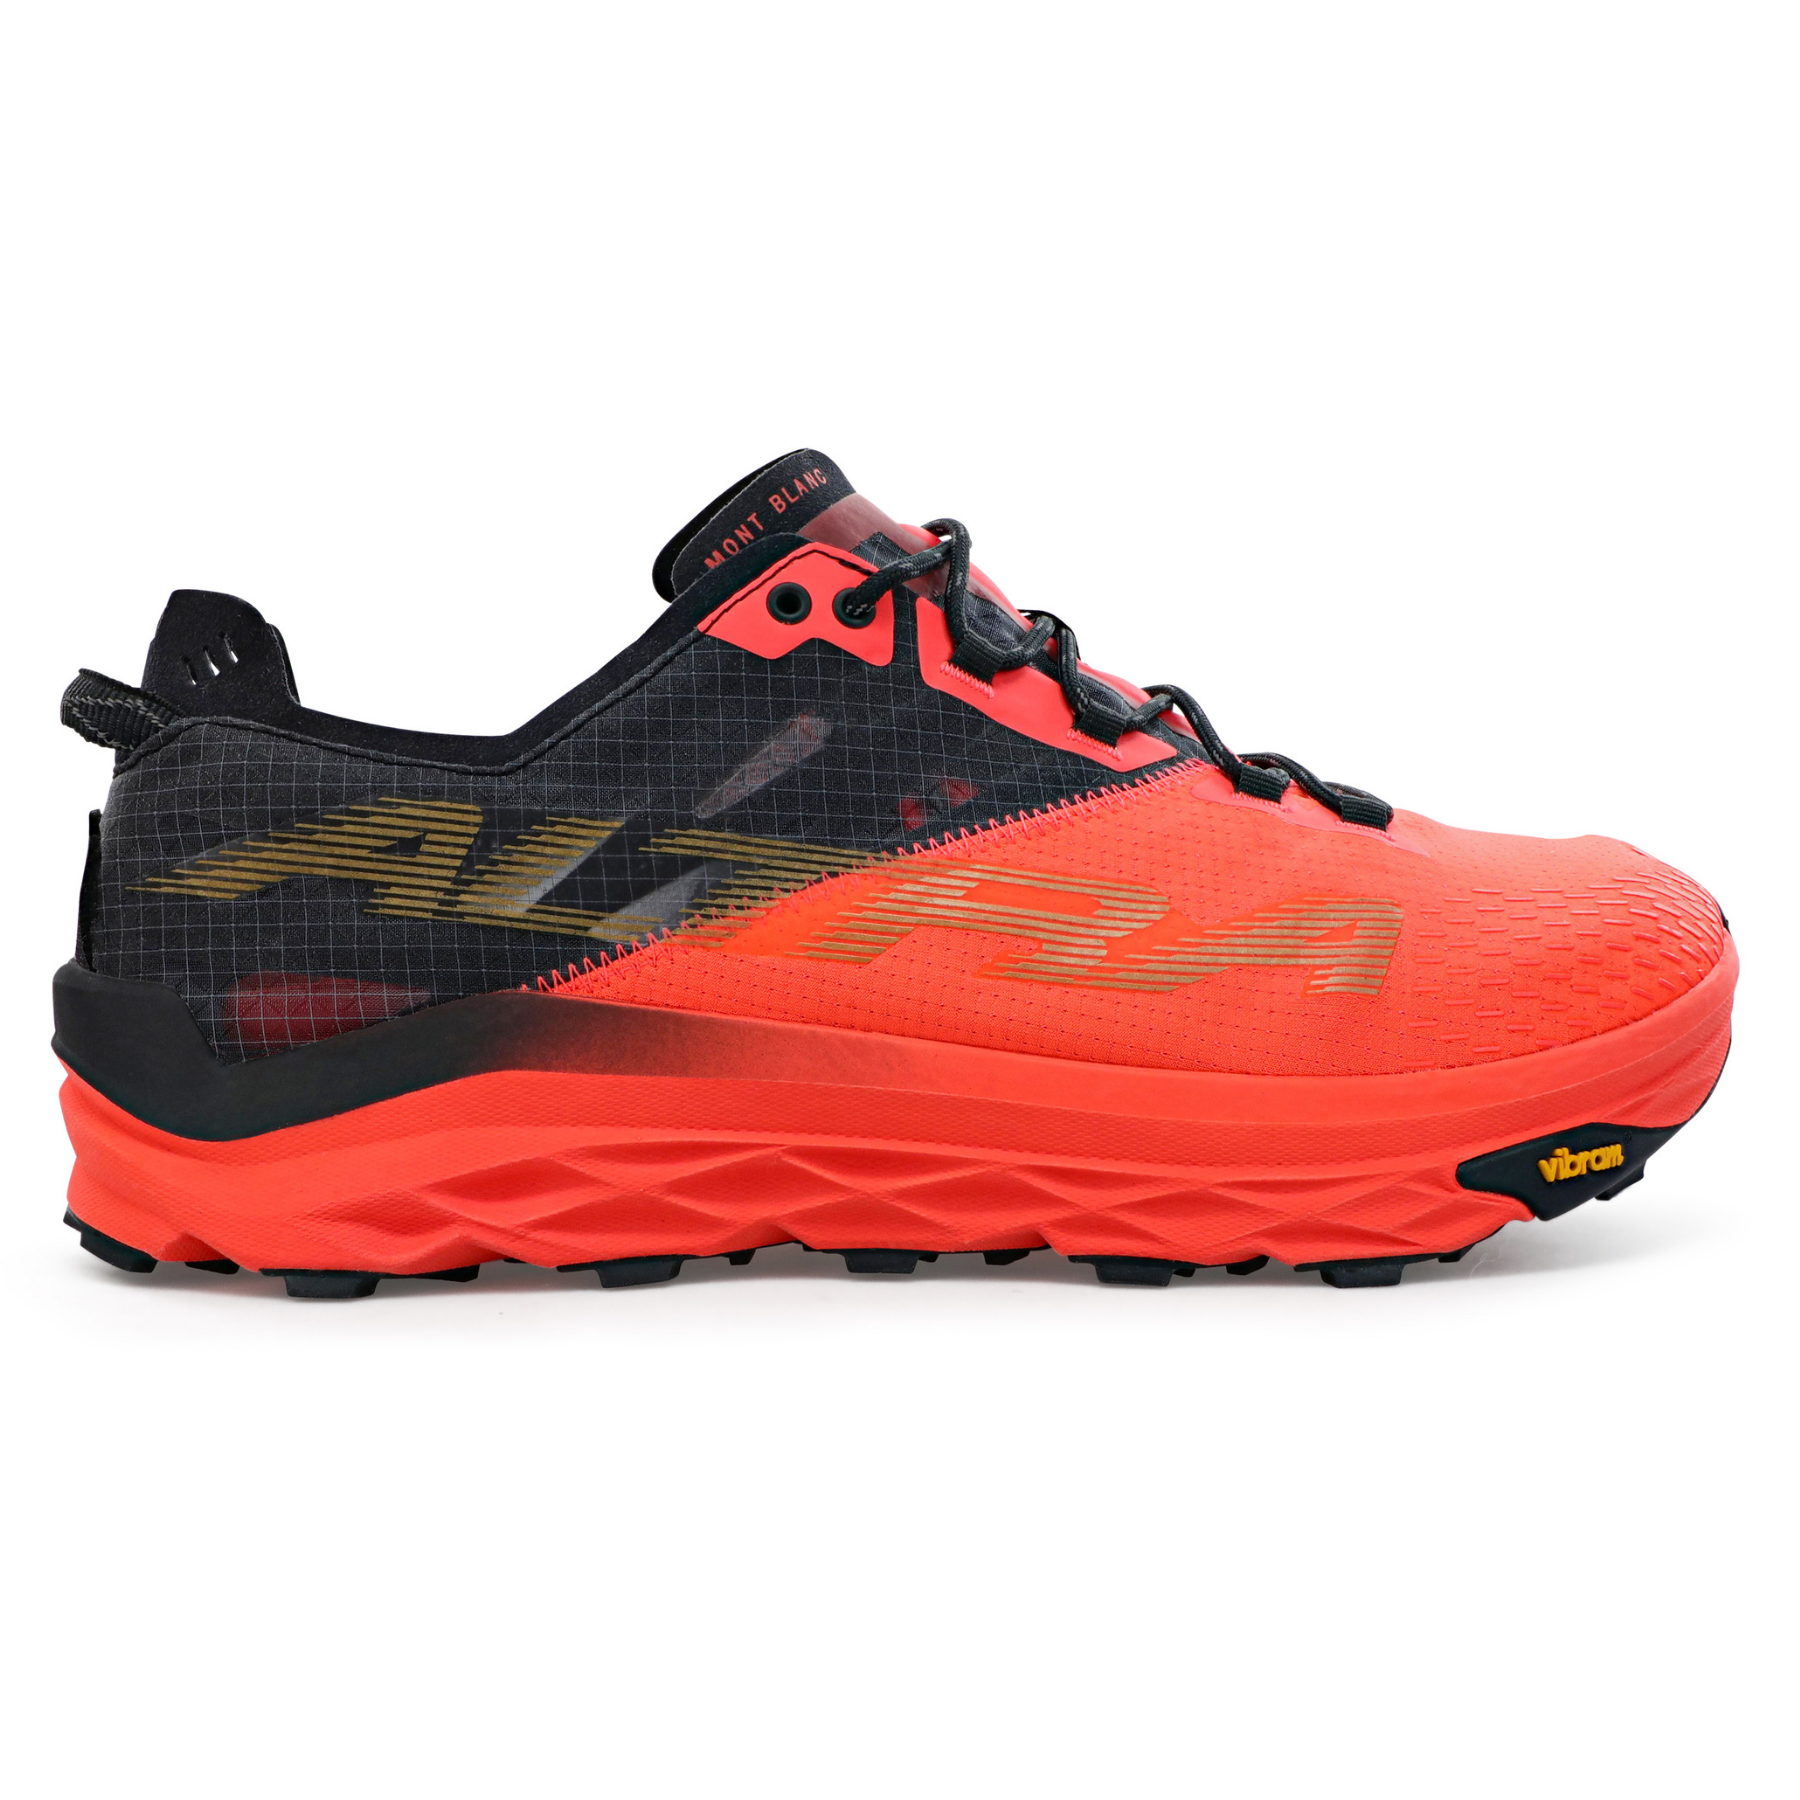 Altra Mont Blanc - Zapatillas trail running - Mujer